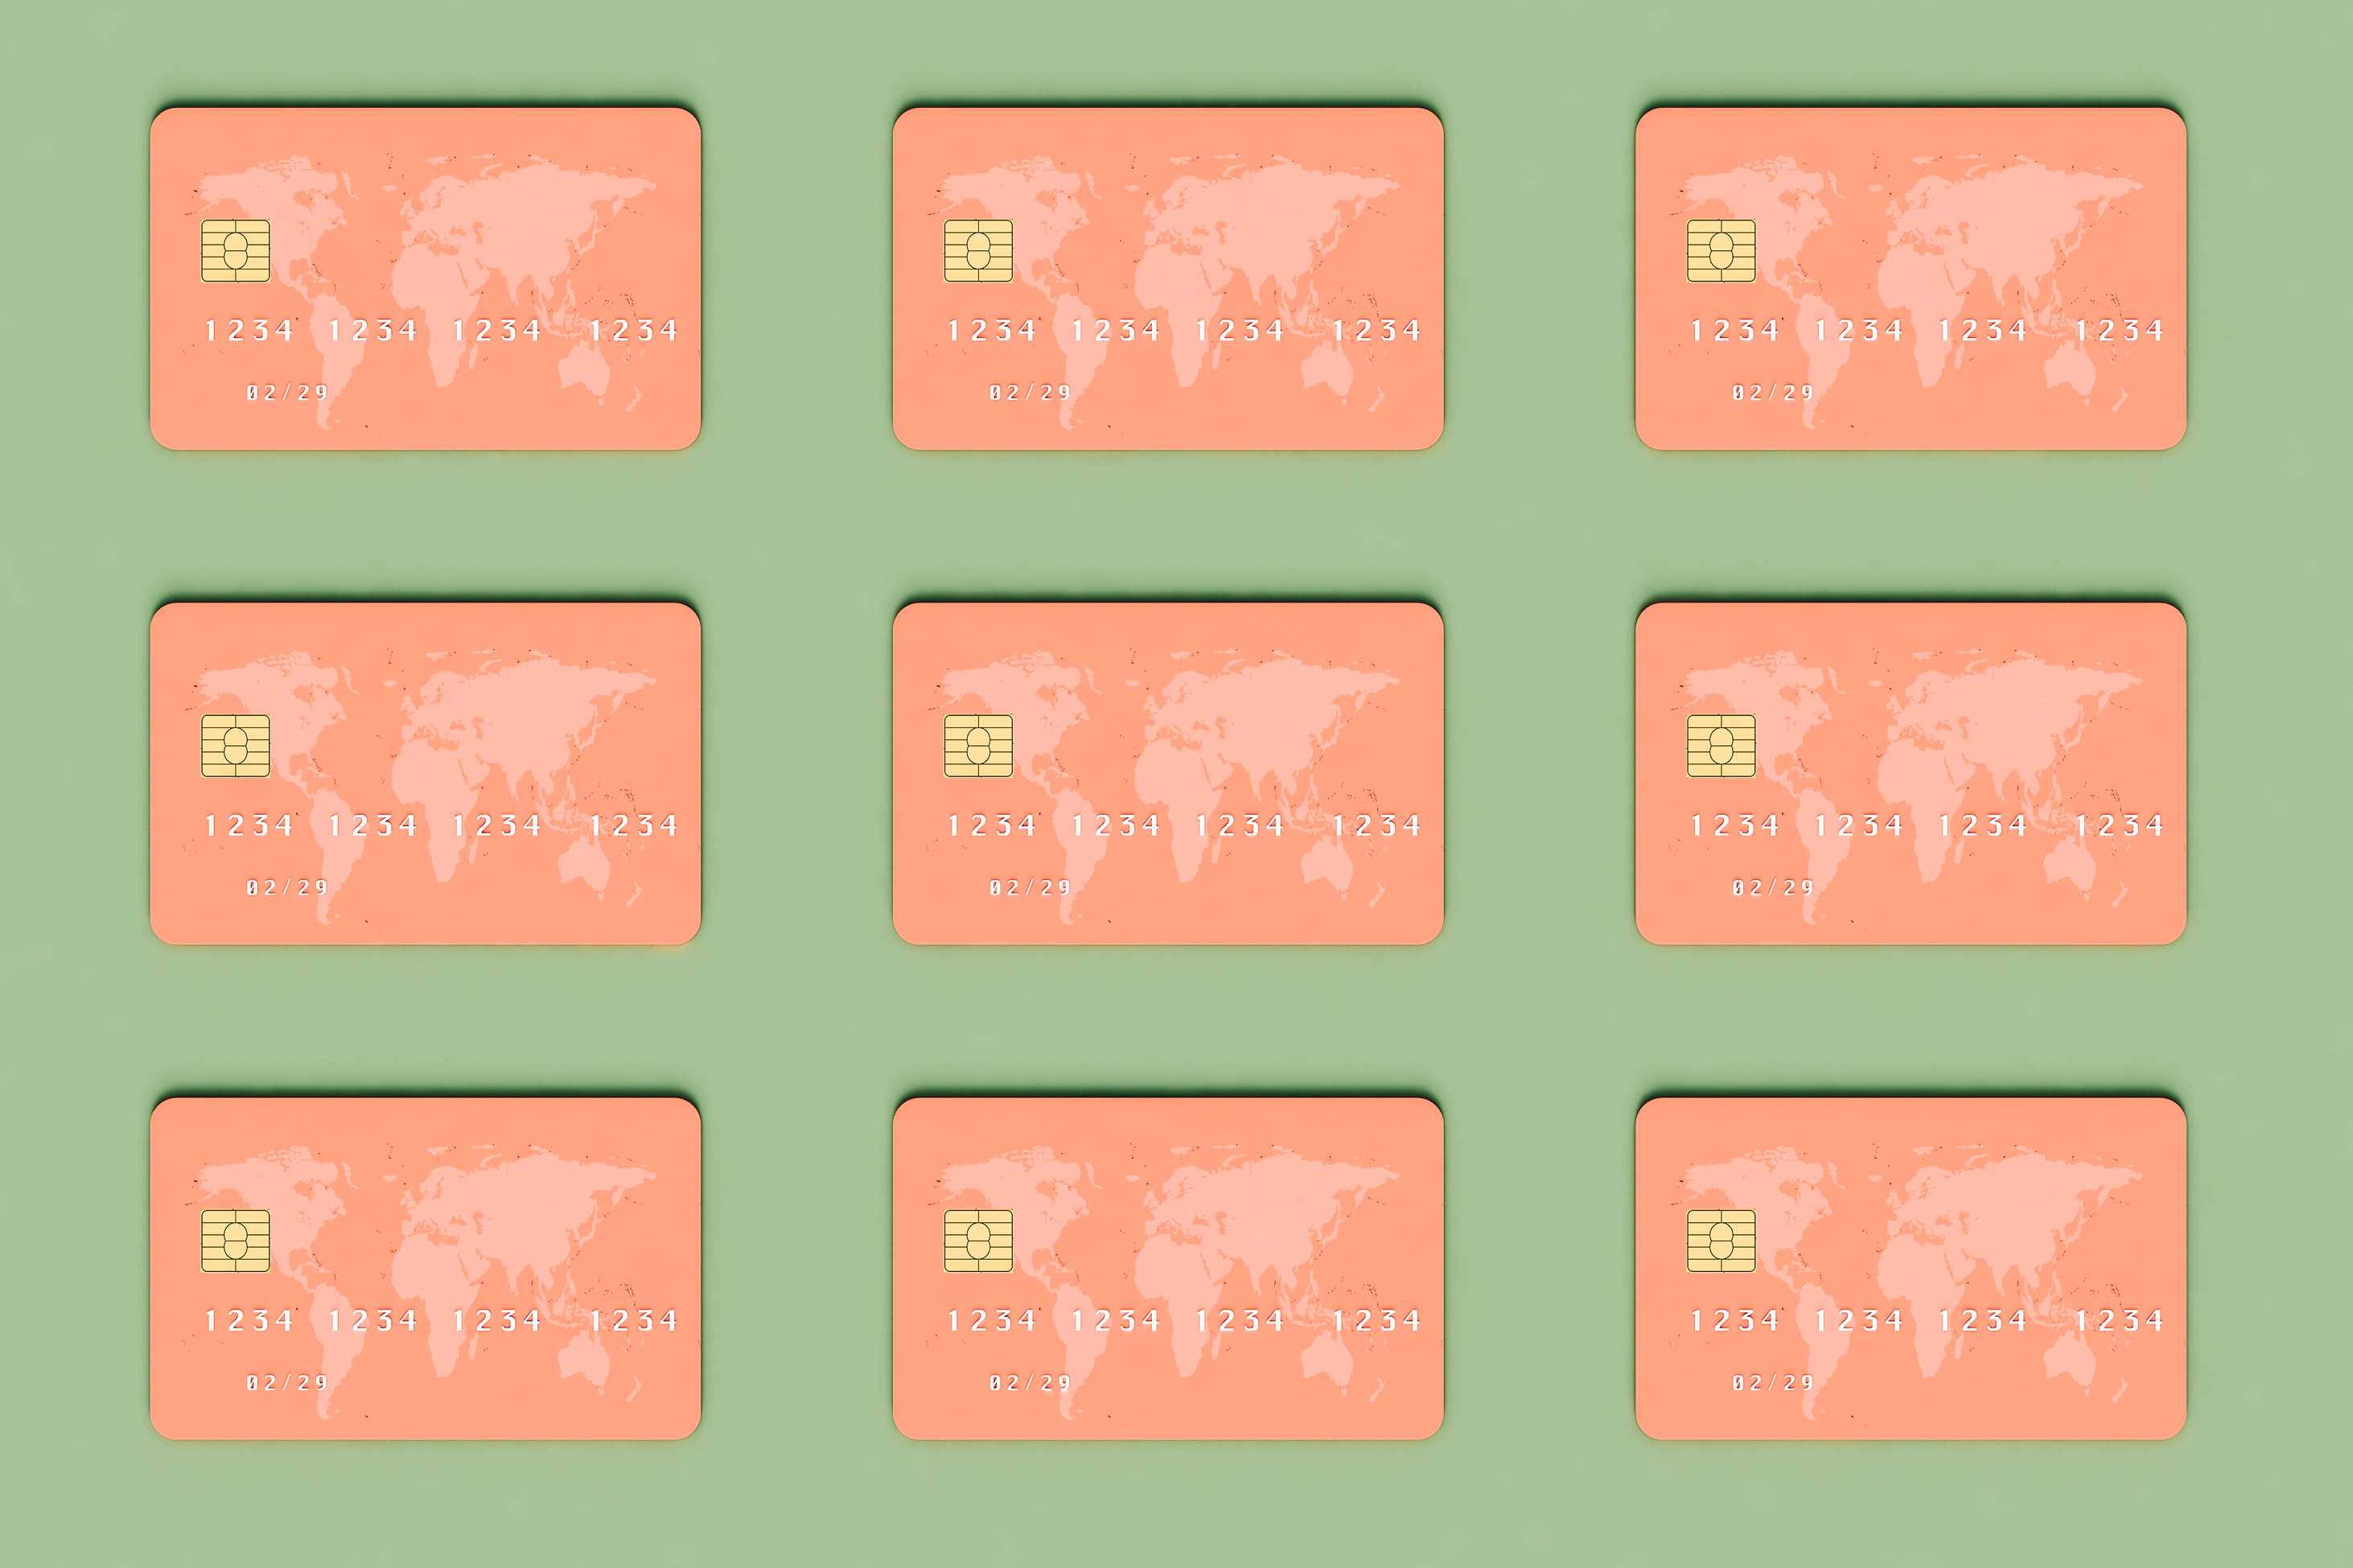 Nine orange credit cards with the picture of the world map arranged in a symmetrical grid against a light green background.